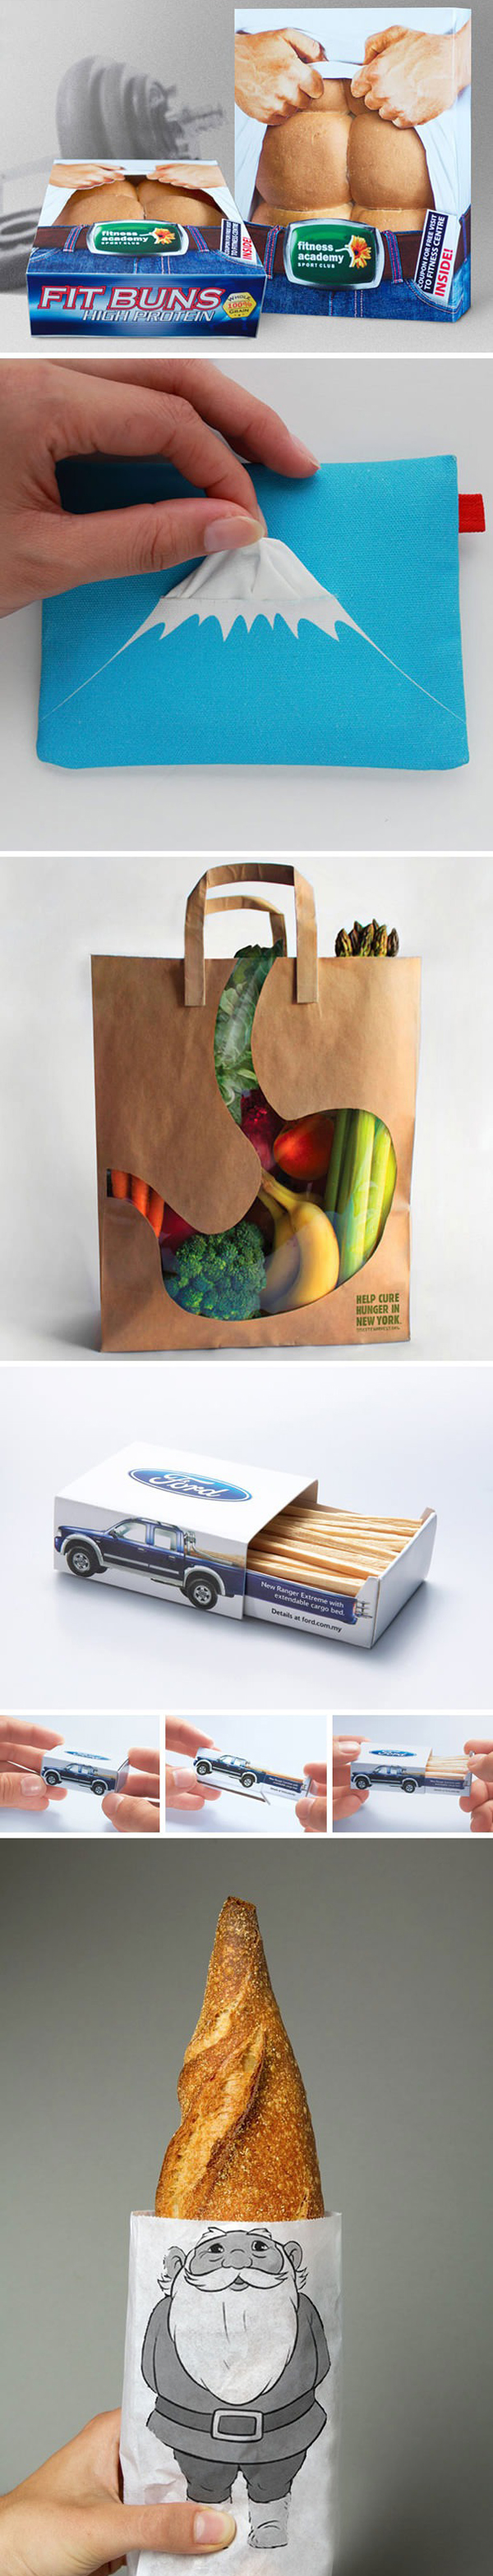 funny creative product packaging